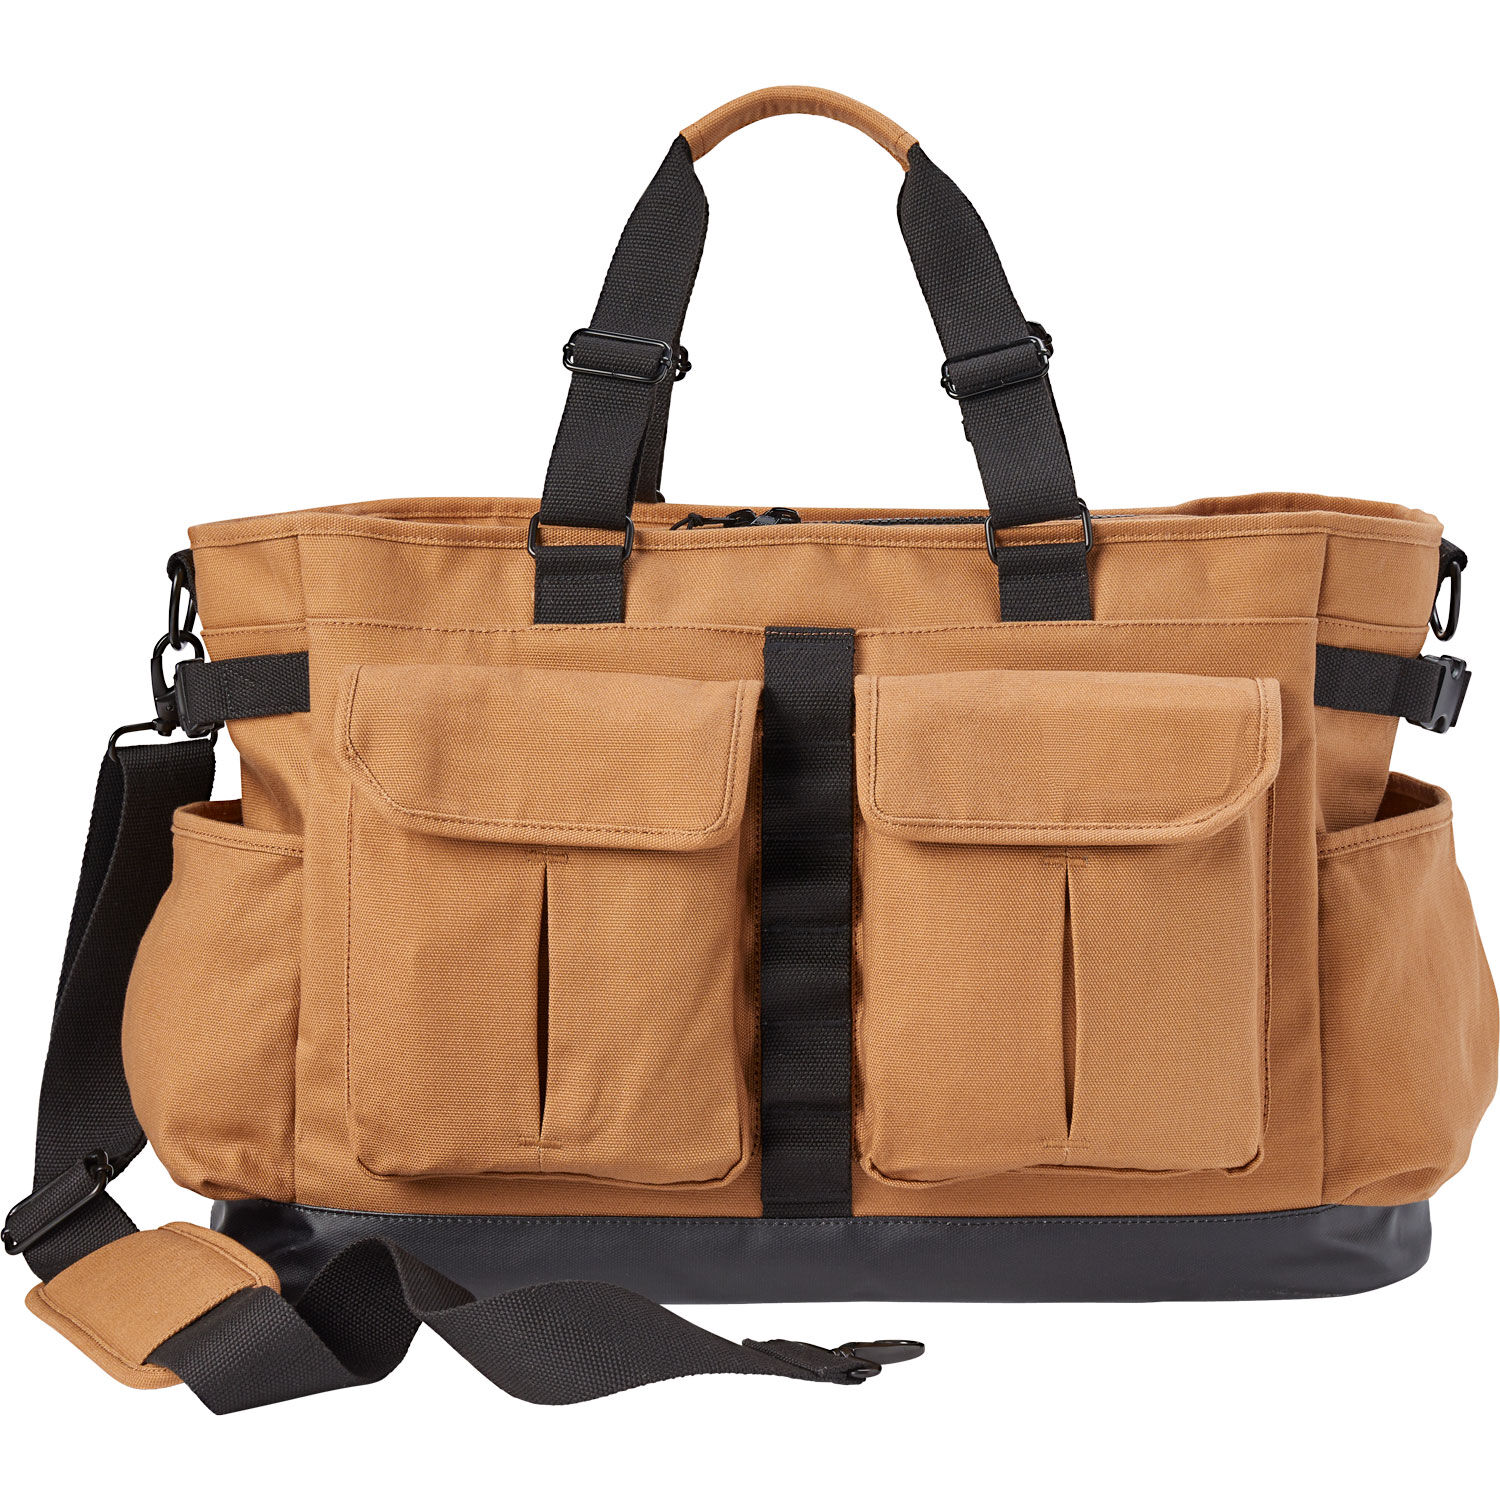 Tote Bags | Duluth Trading Company